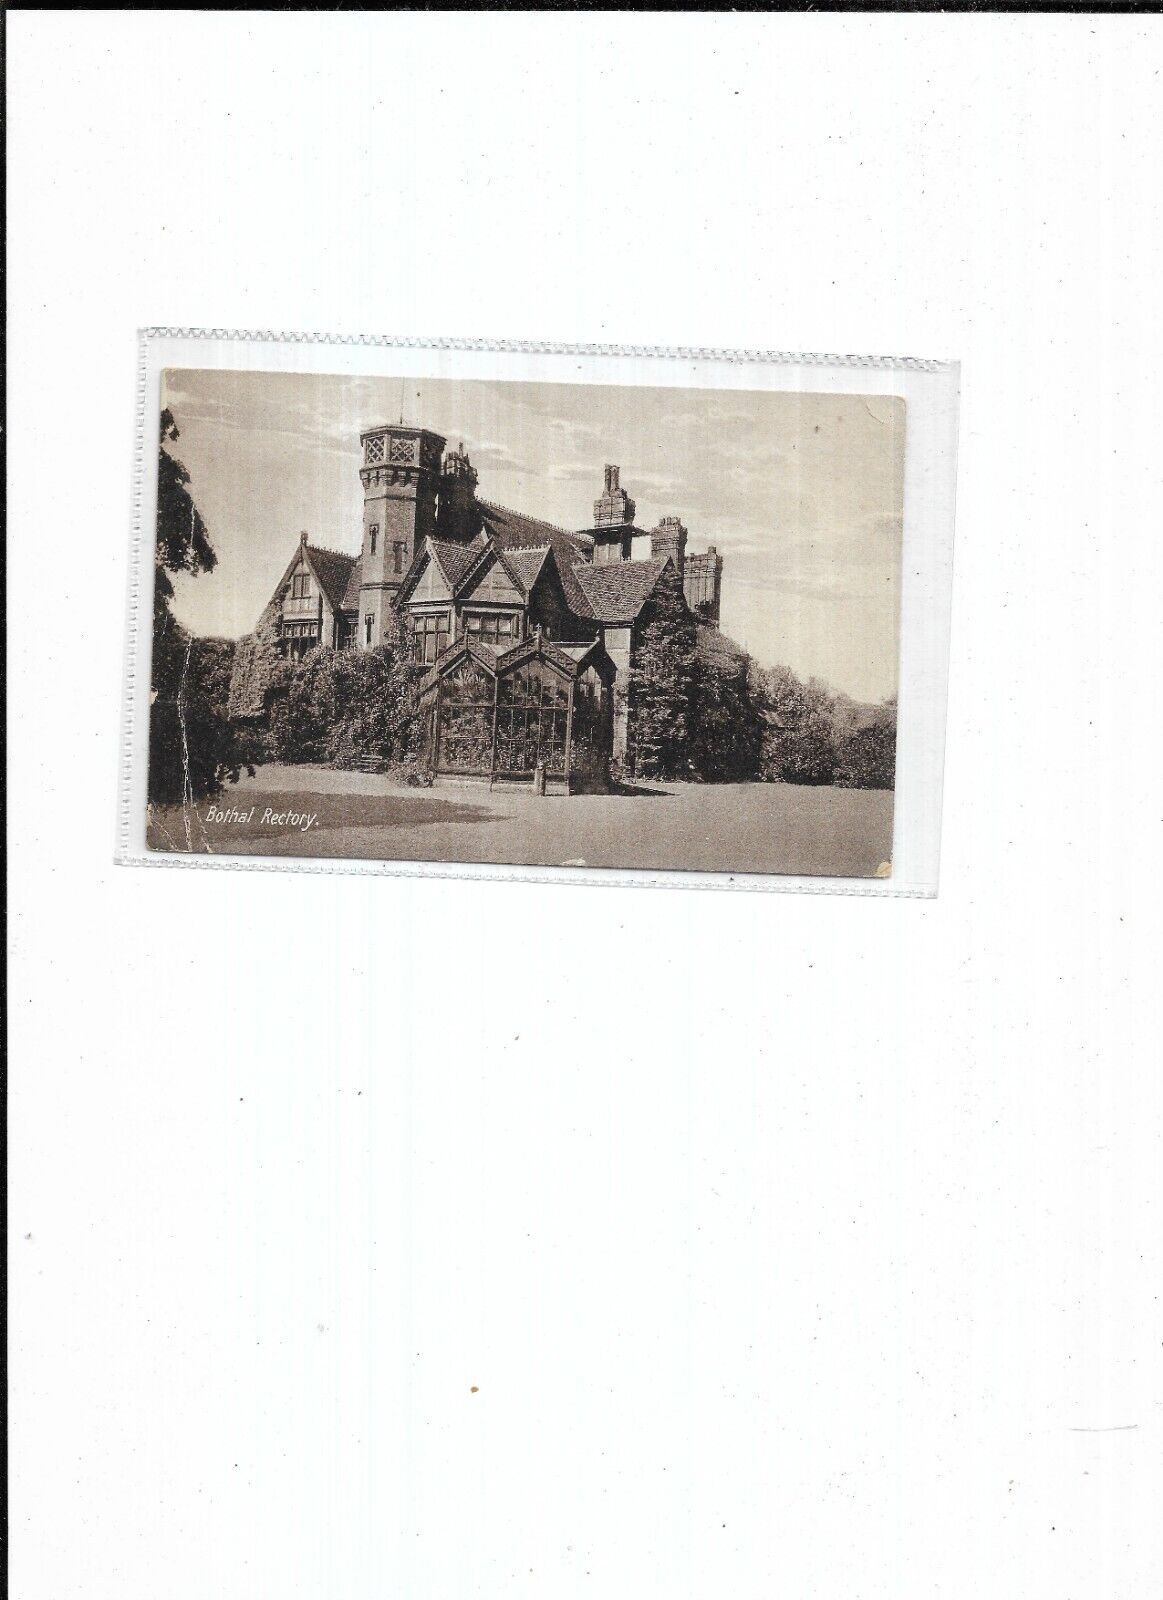 Northumberland Service "Bothal Rectory" Postmarked 1947